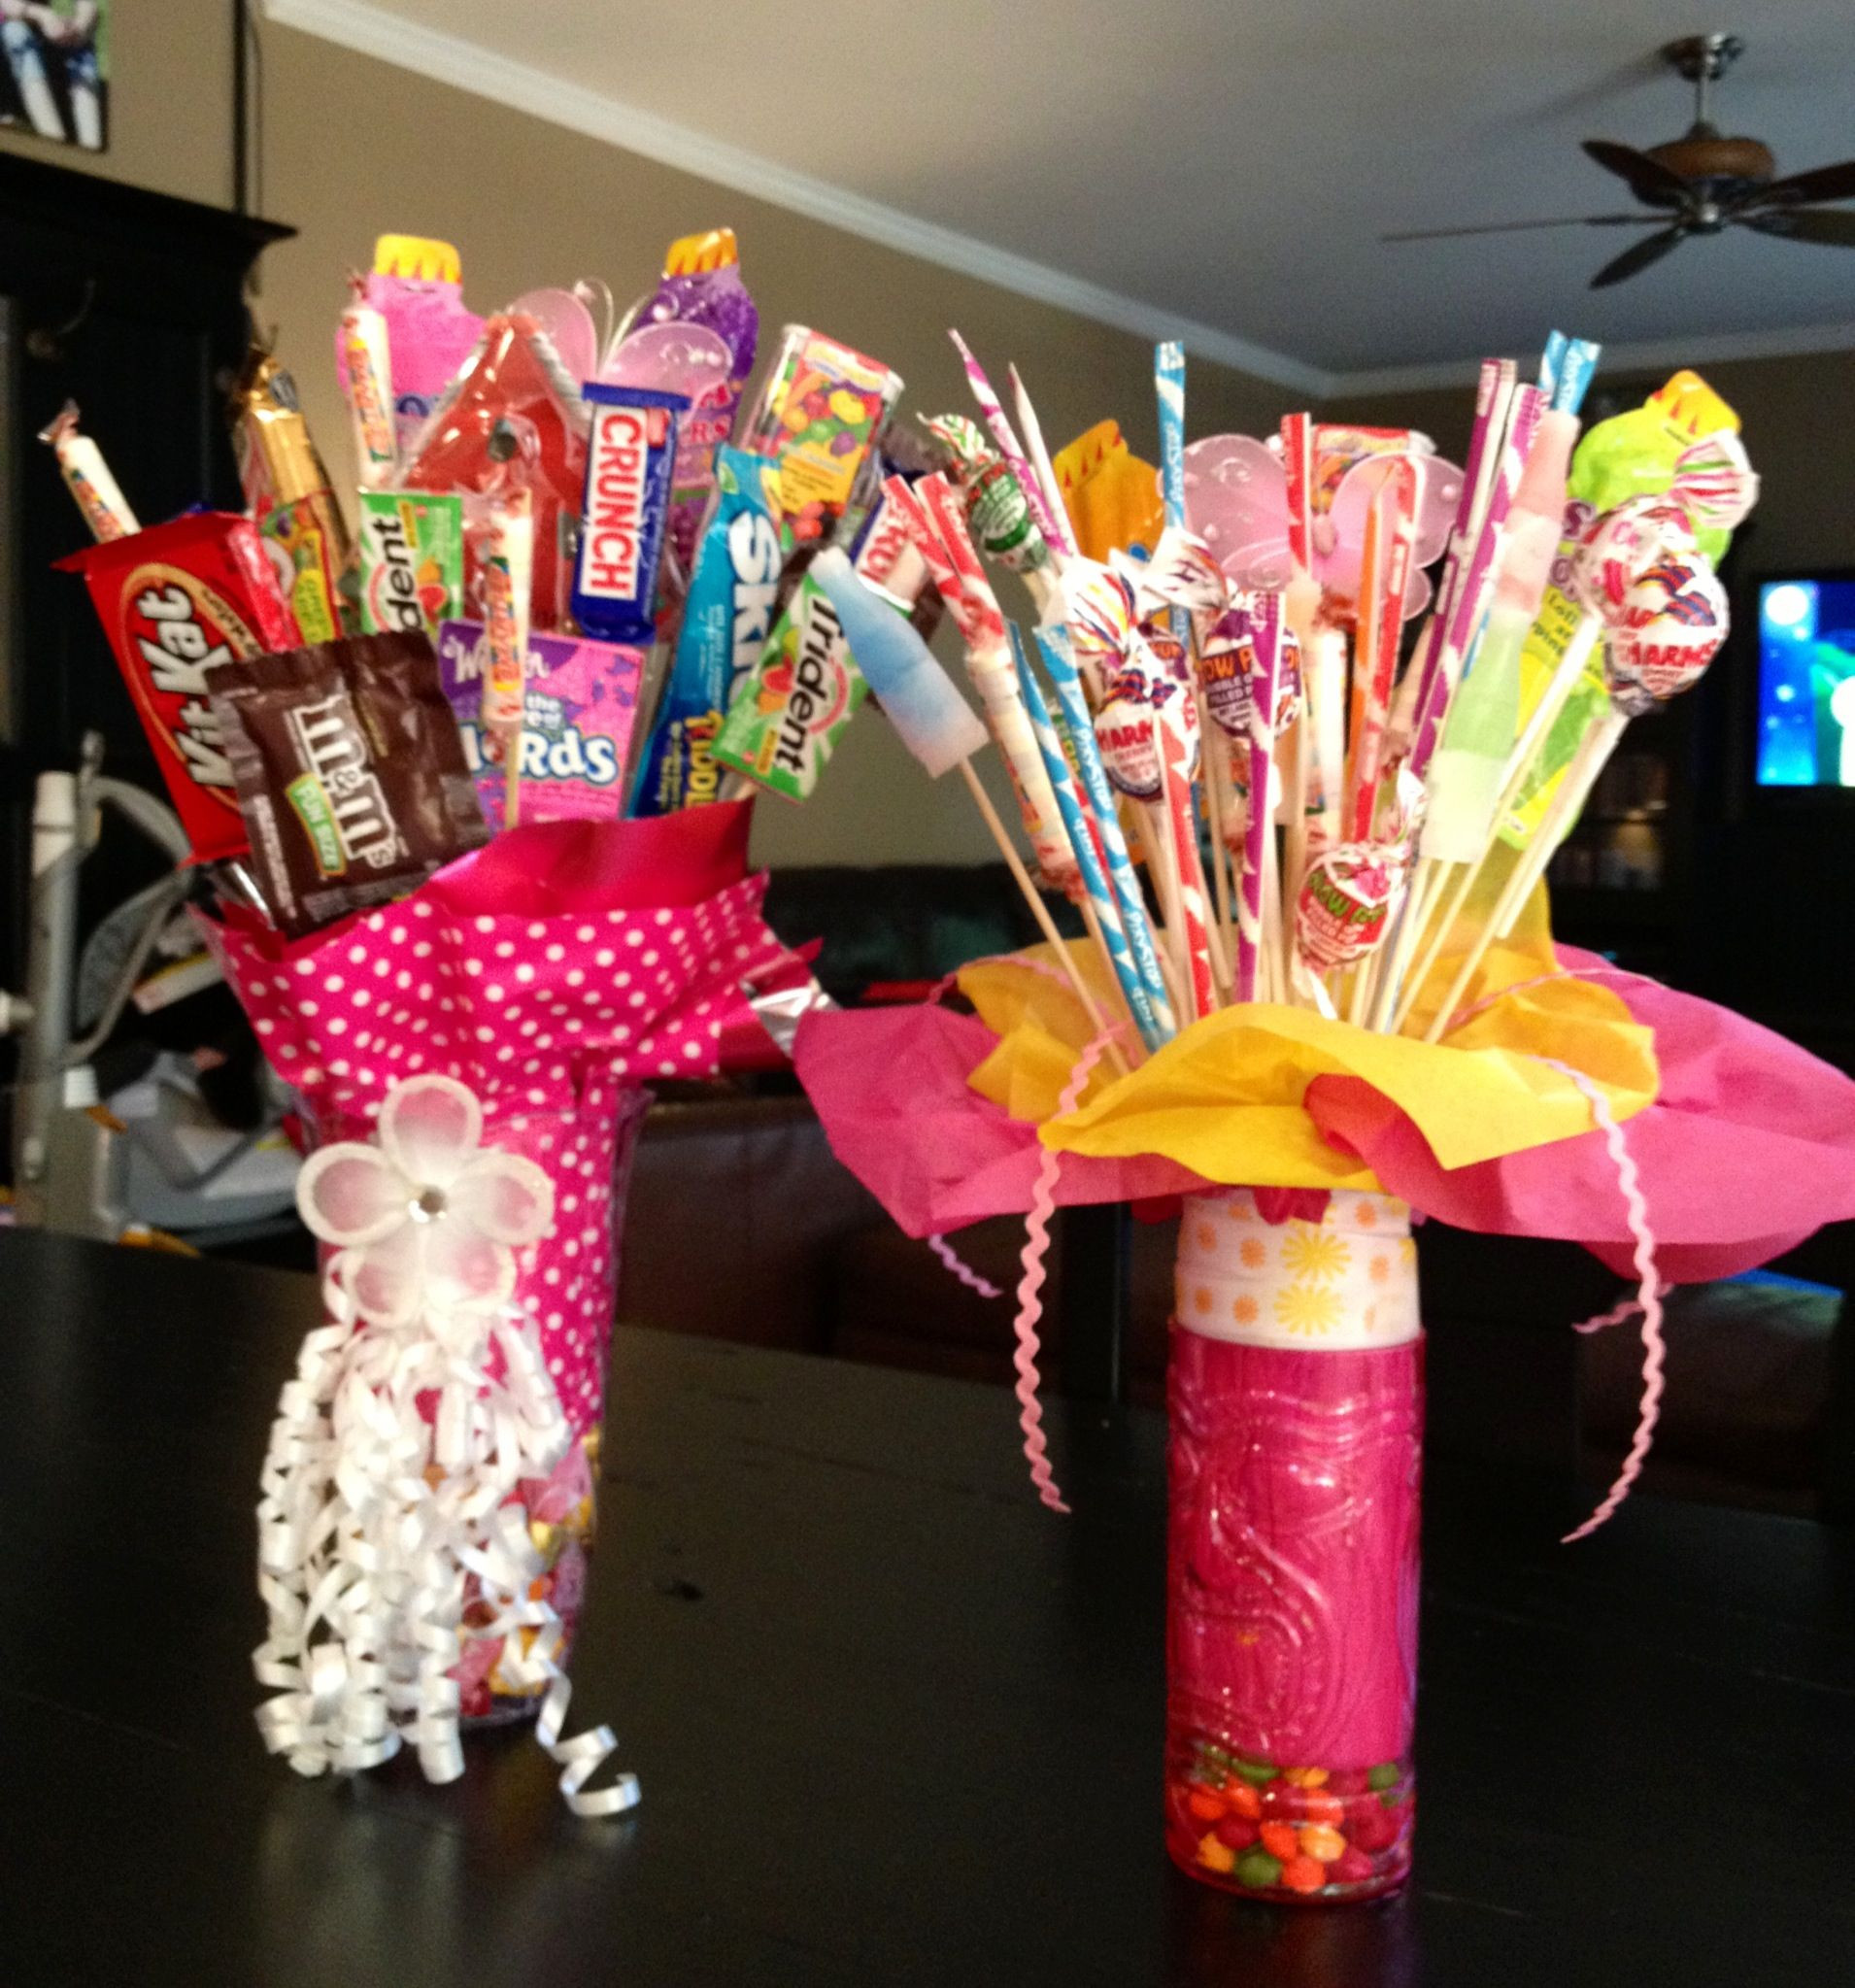 6Th Grade Graduation Gift Ideas
 Candy bouquets for daughters 5th grade graduation